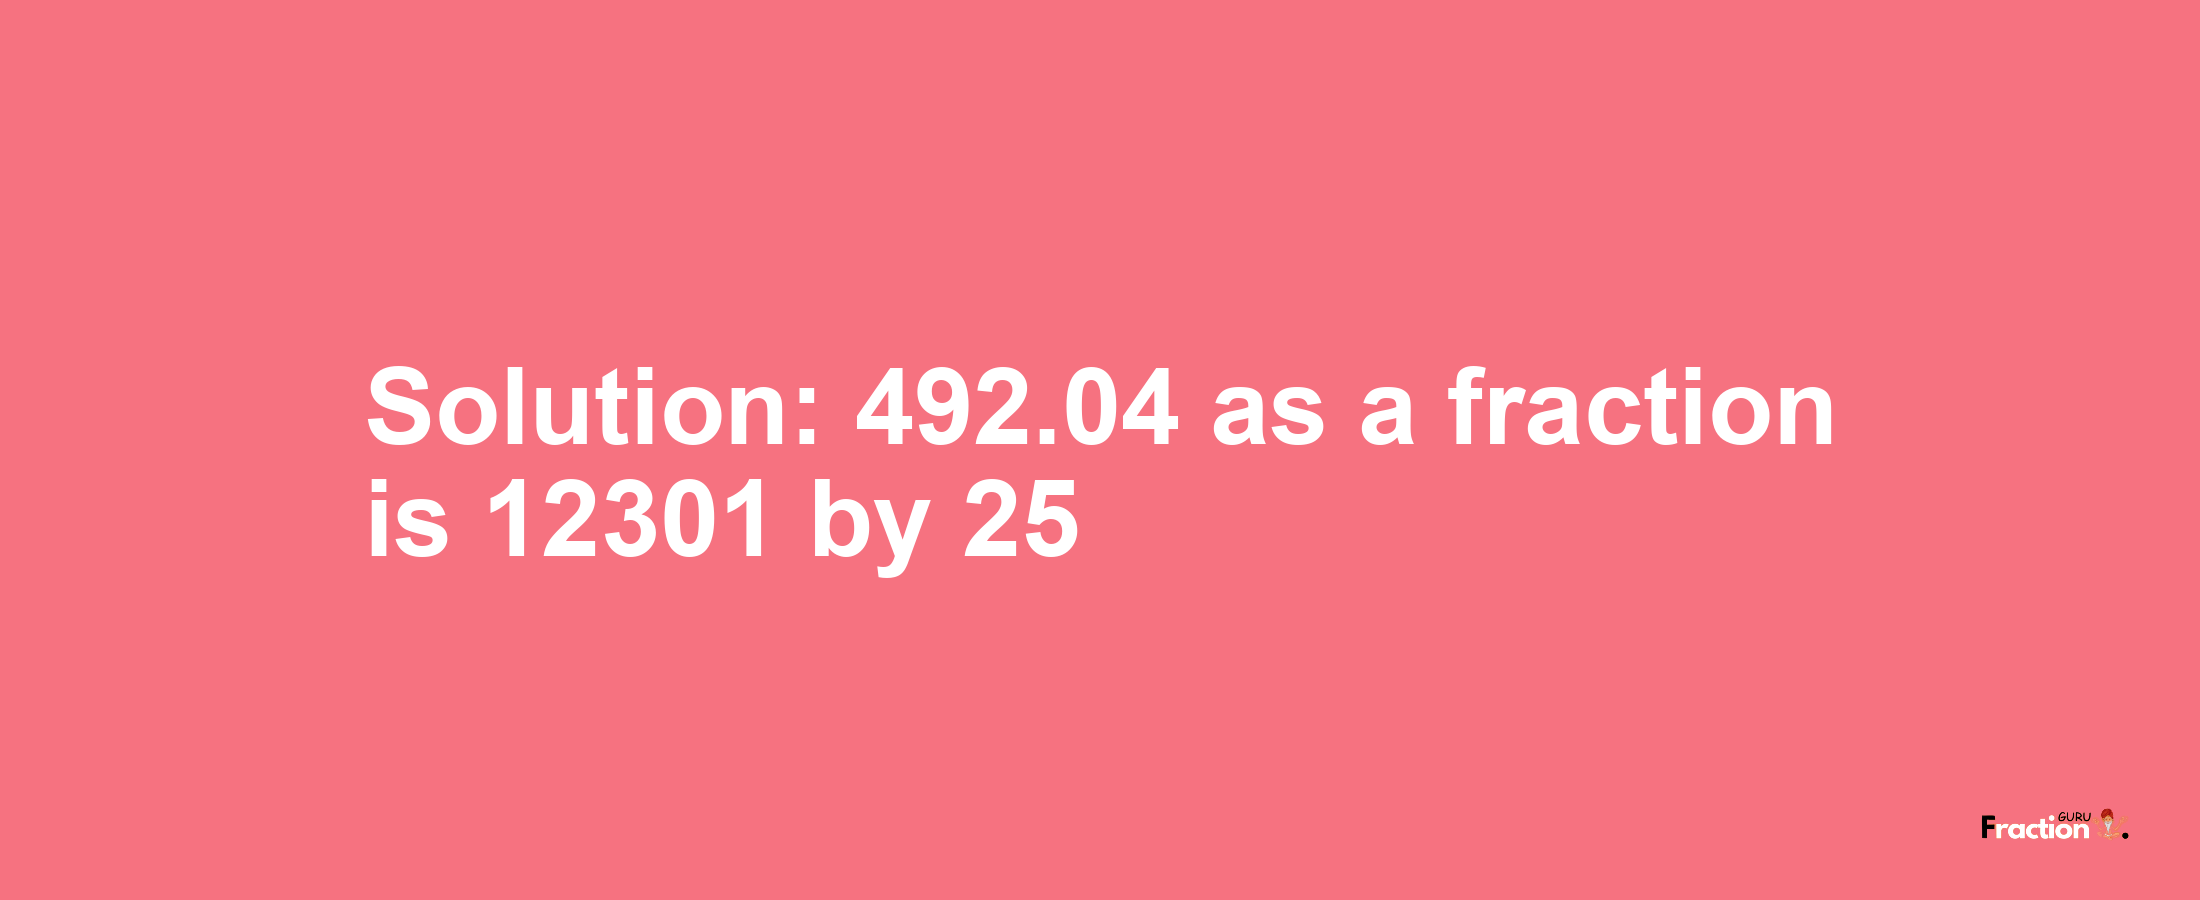 Solution:492.04 as a fraction is 12301/25